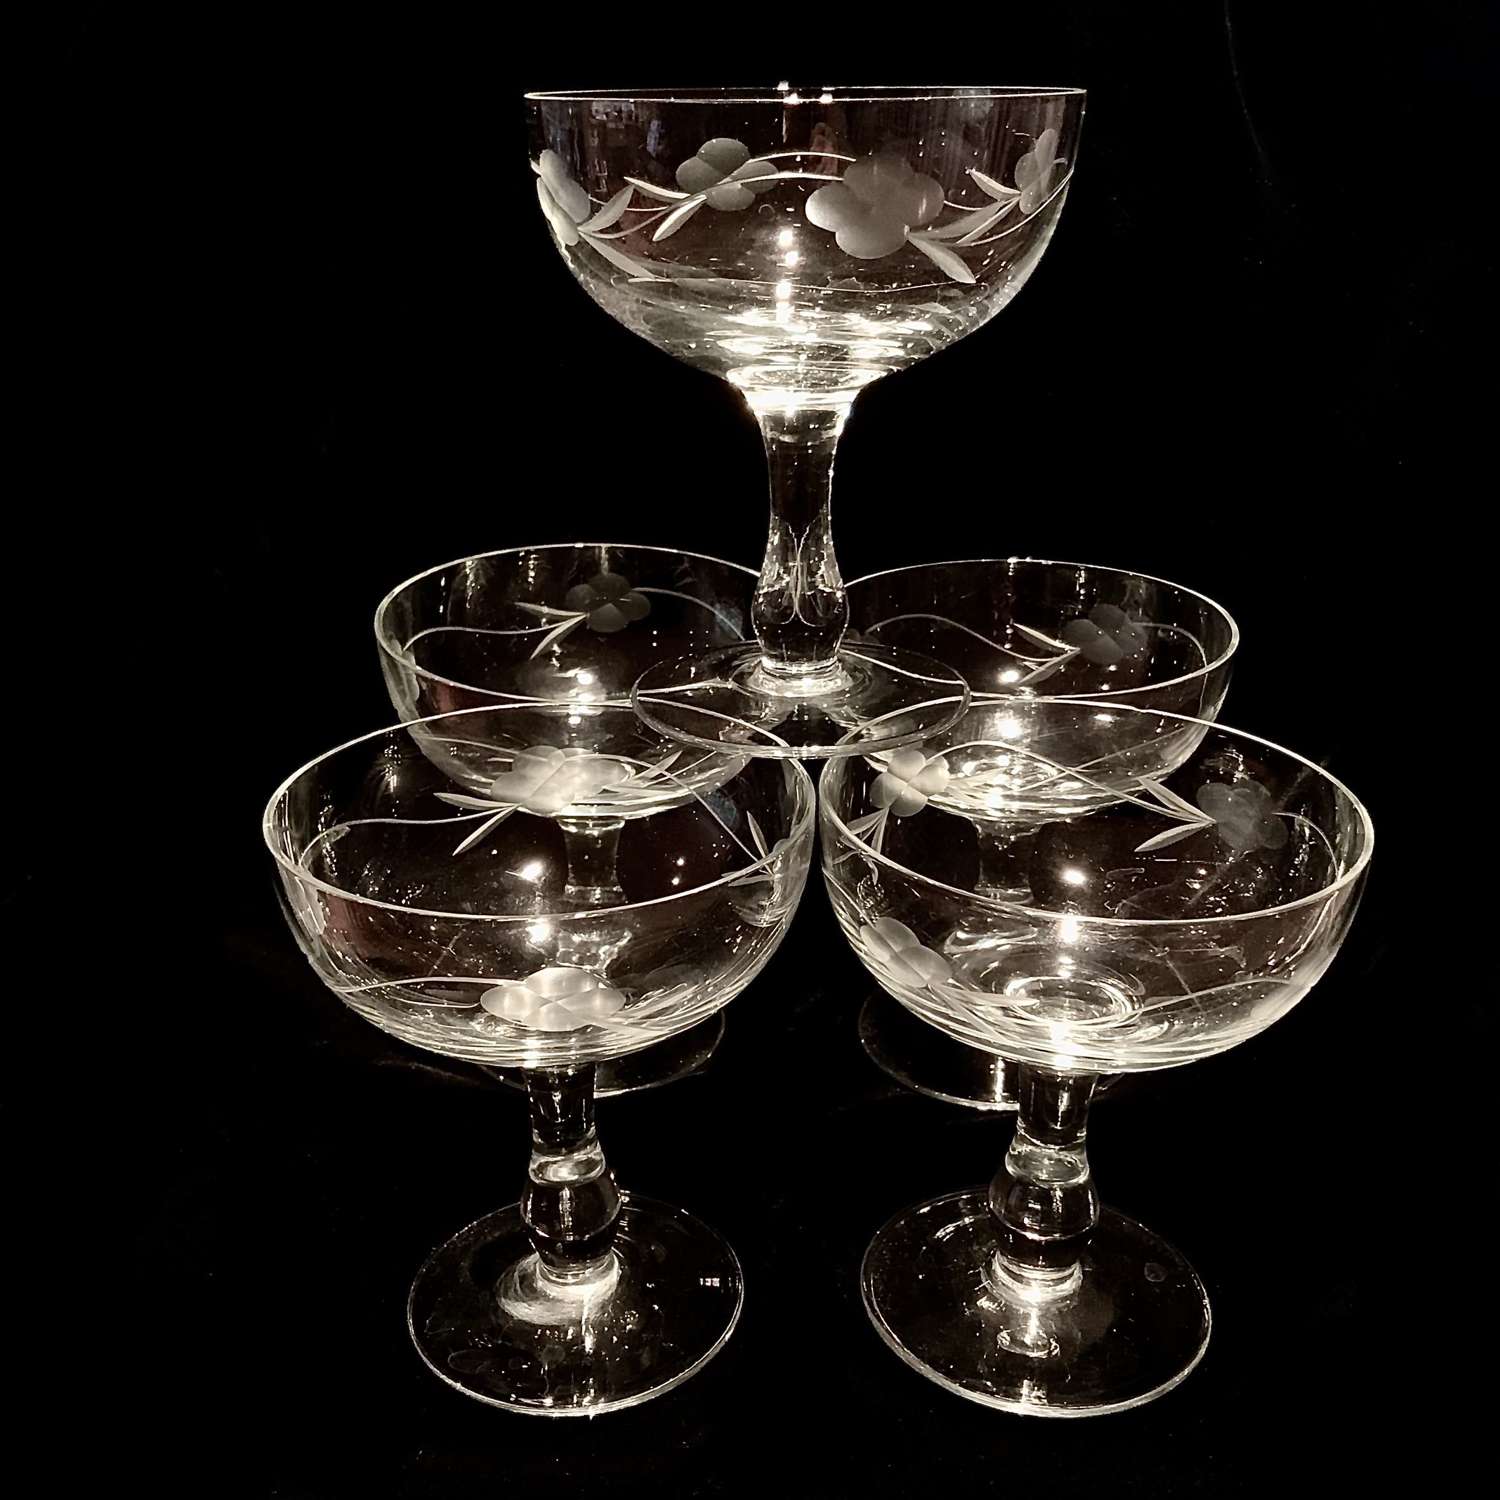 A set of five (5) matching cut crystal champagne, coupes or boats